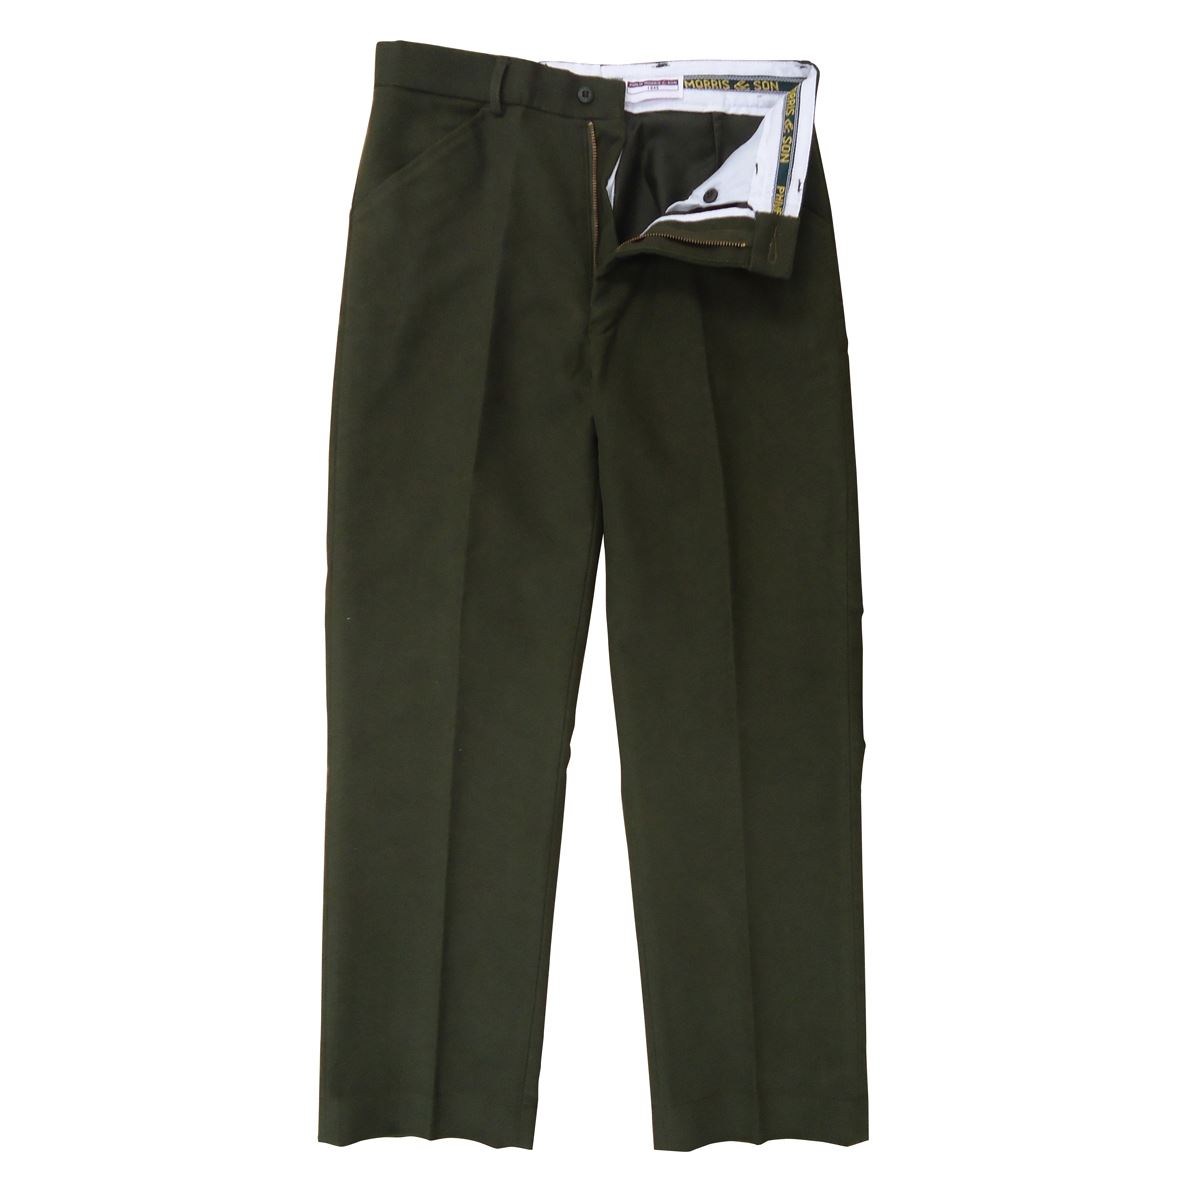 What closure do the mens moleskin trousers from Heritage 1845 have?